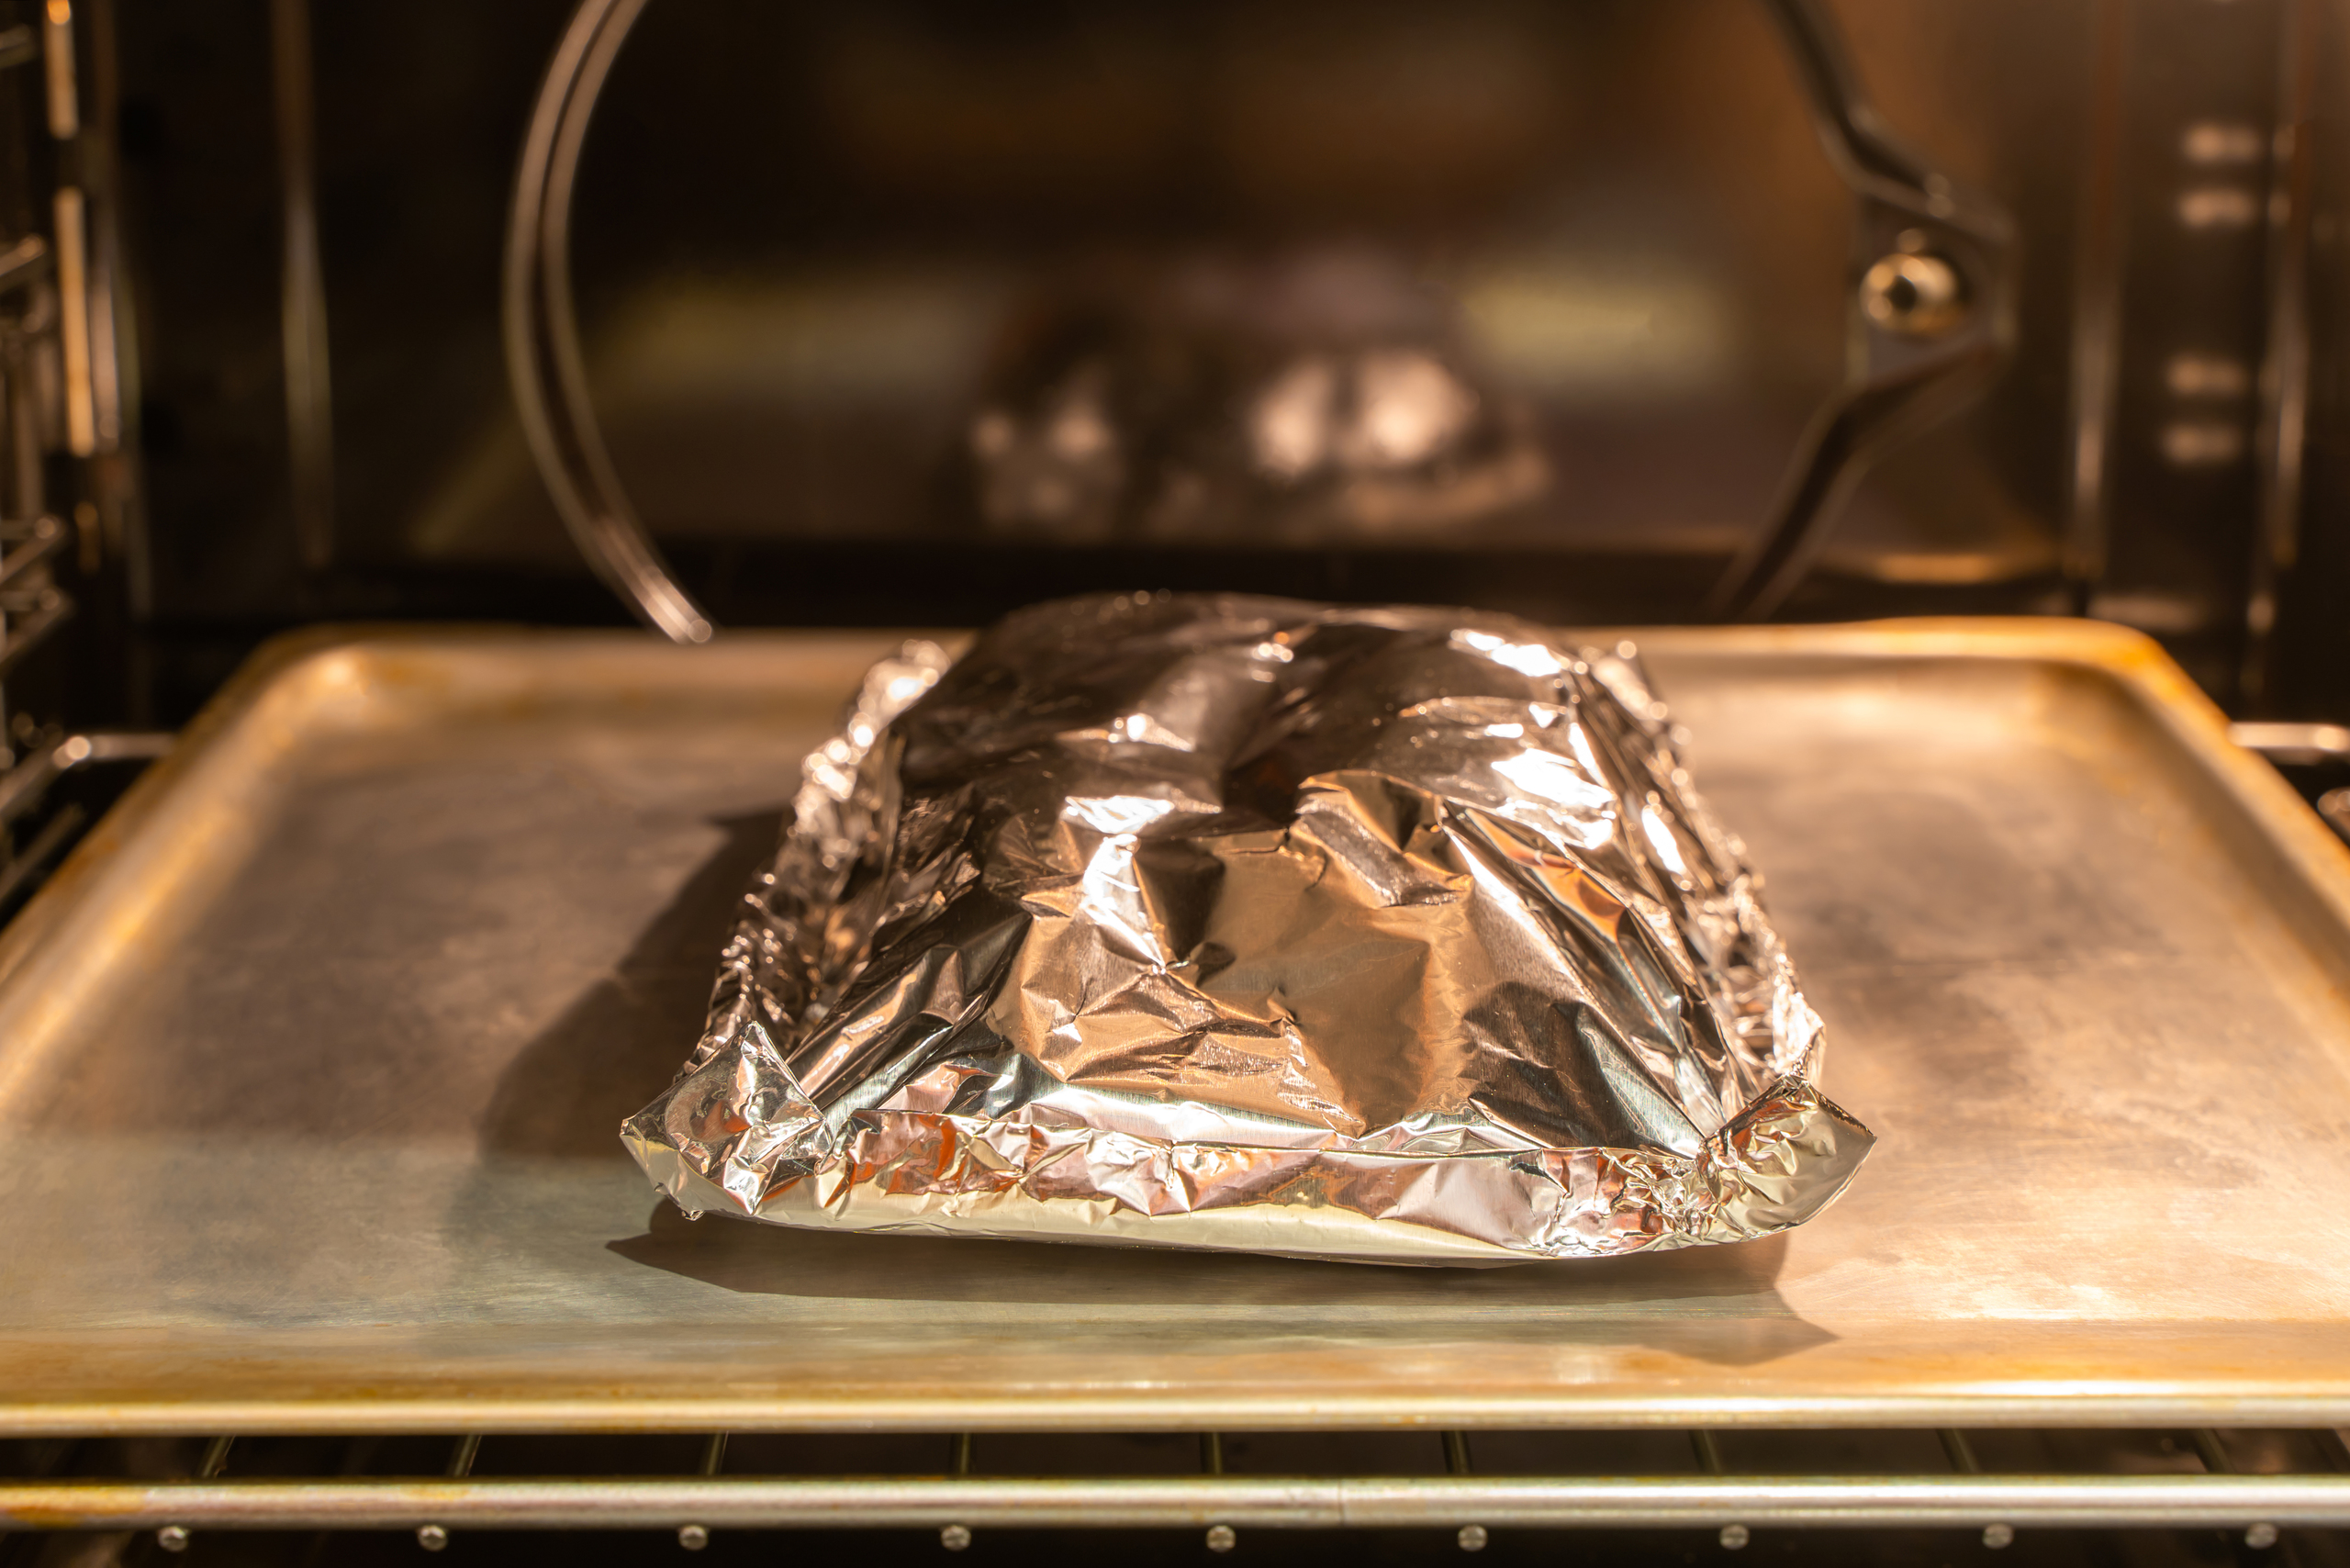 Food covered with foil on the pan inside gas oven ready for cooking. Stock photo